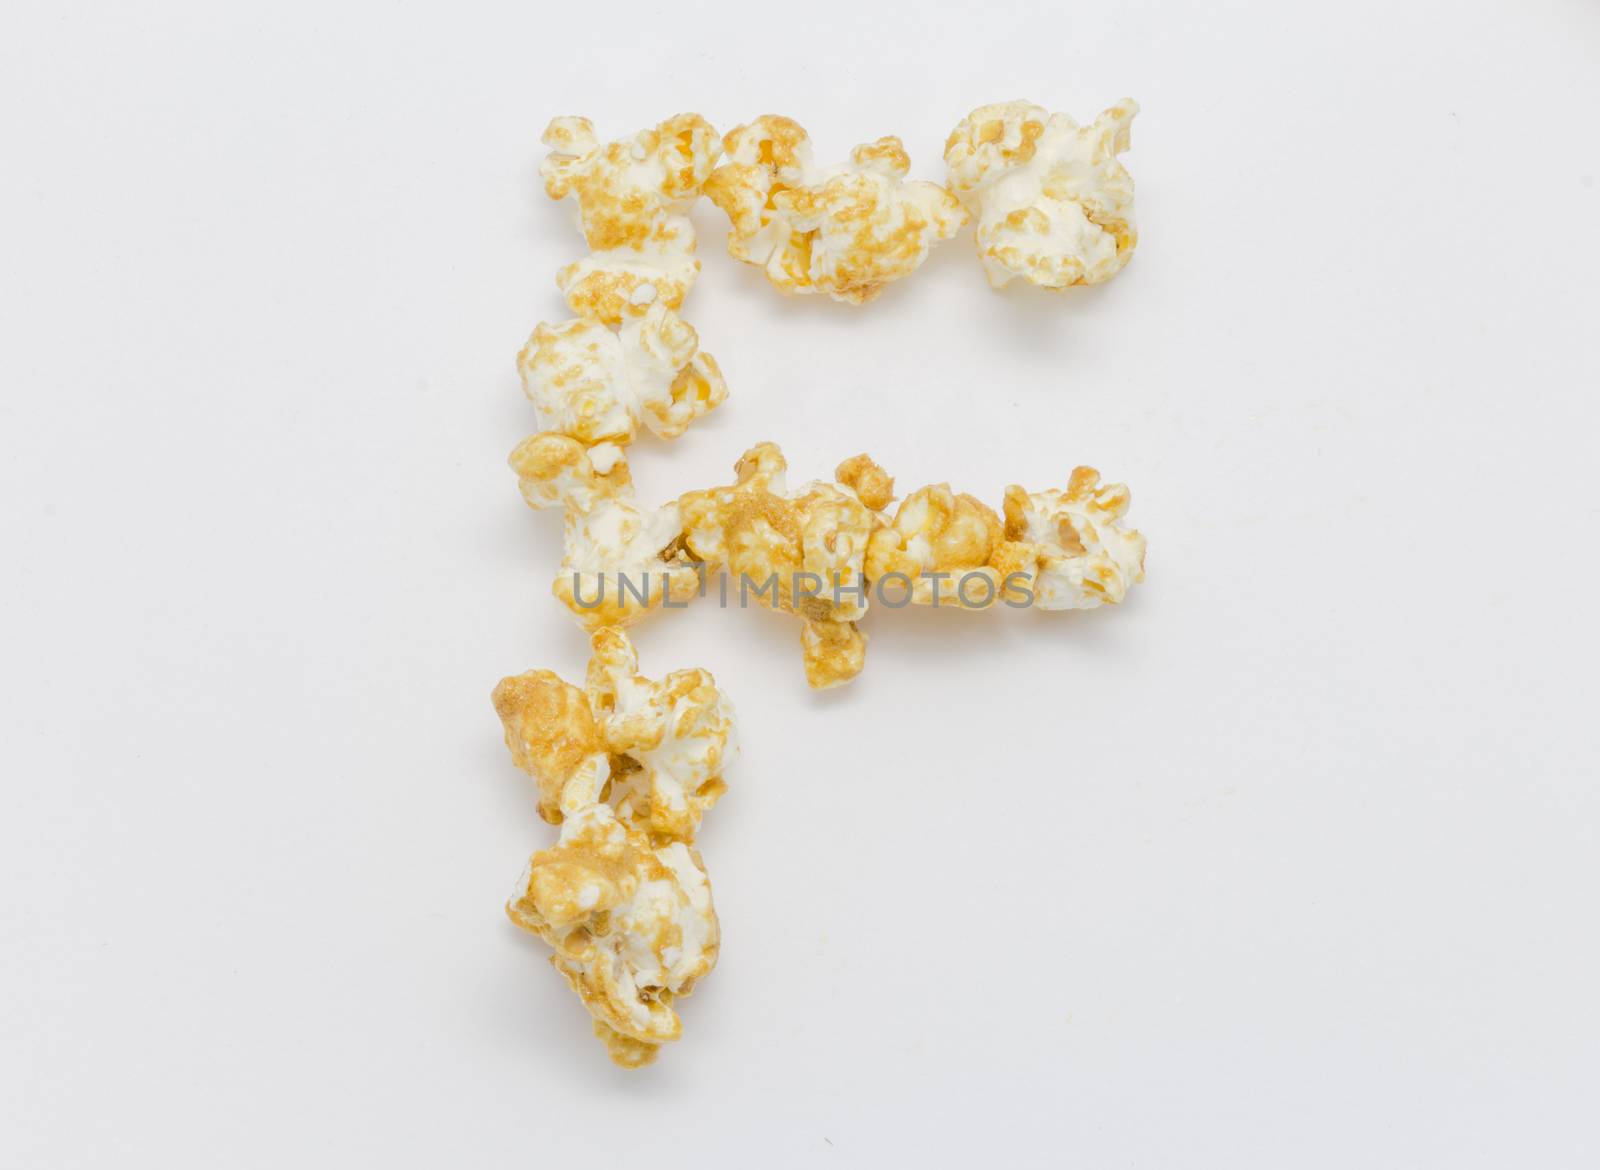 pop corn forming letter F isolated on white background by chingraph